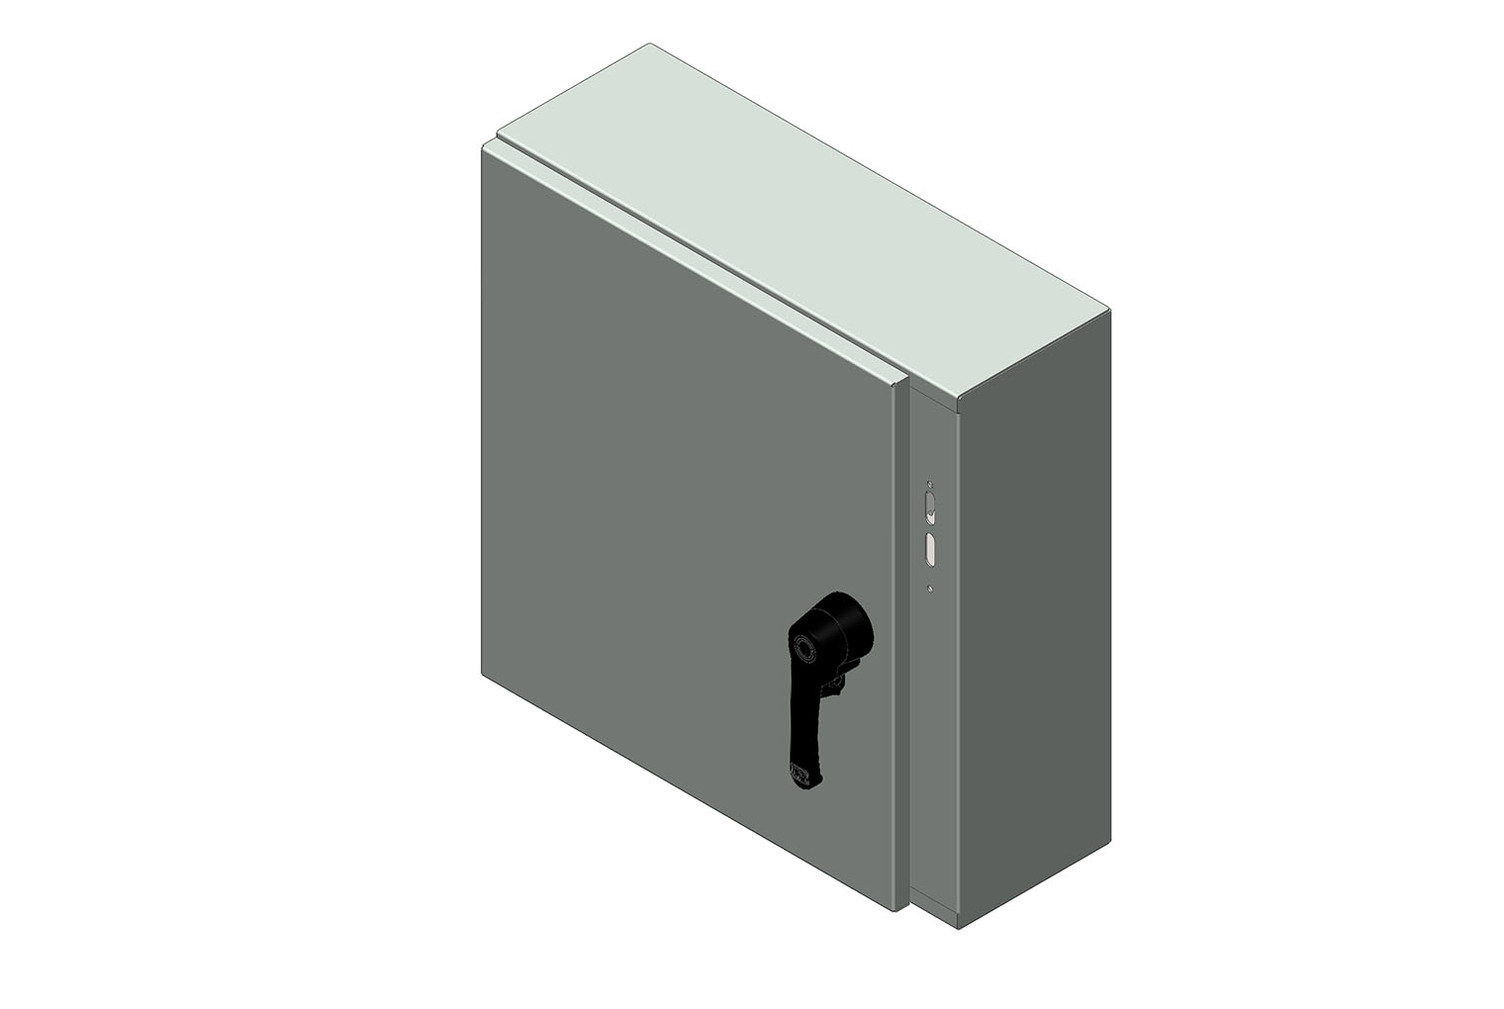 RMR Standard Wall-Mount Disconnect Enclosure, Type 4, with Solid Single Door - Image 13